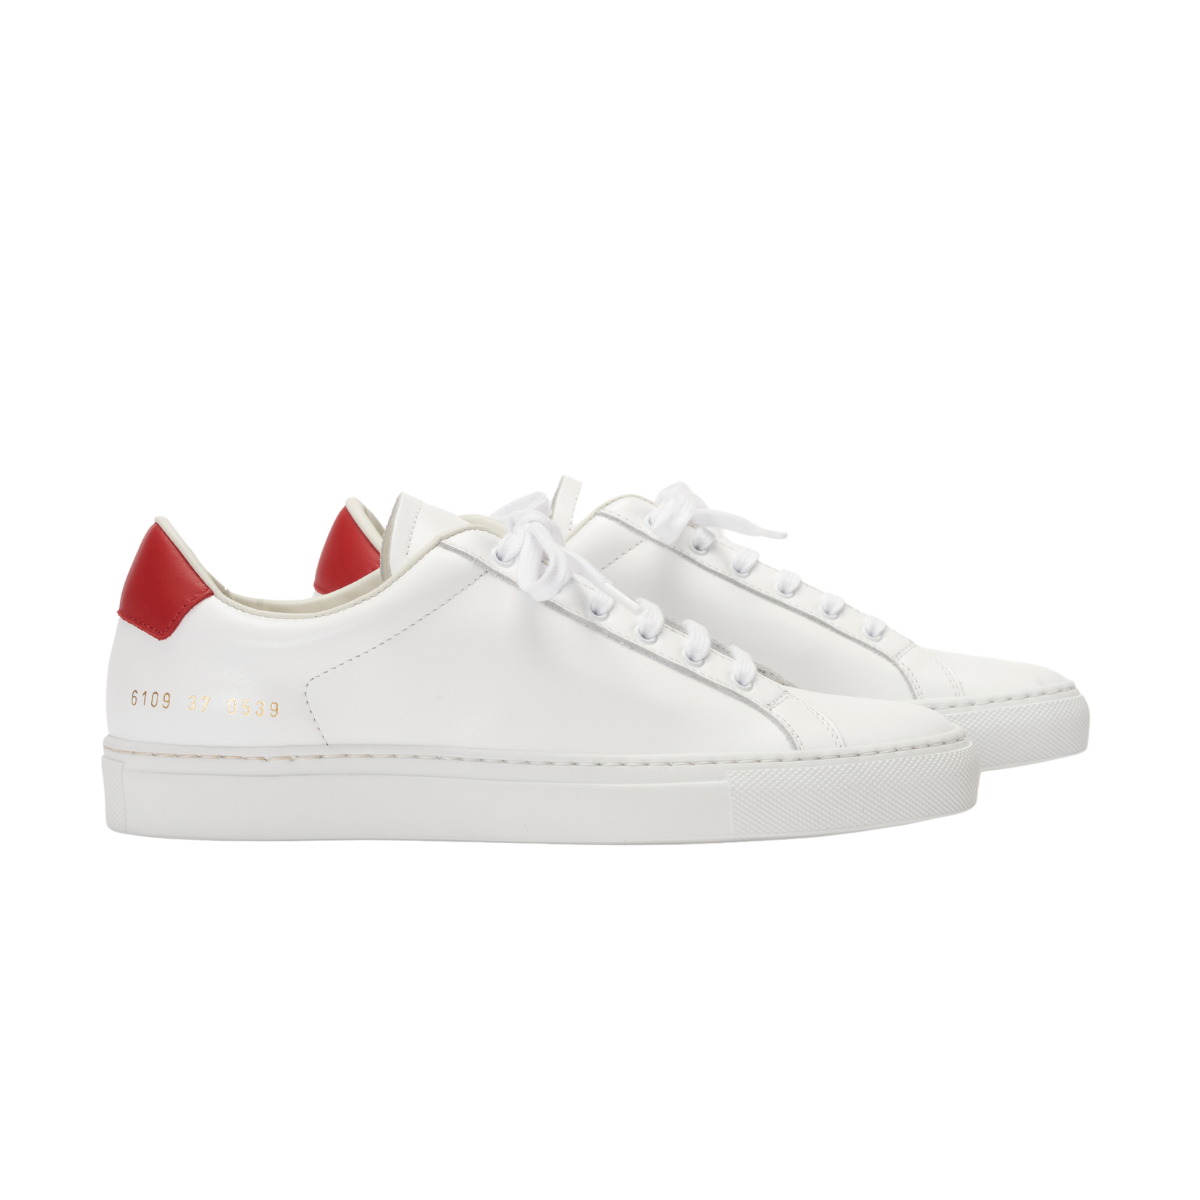 Common Projects | sneakers for women - 6109 Retro Low | White/Red | kapok